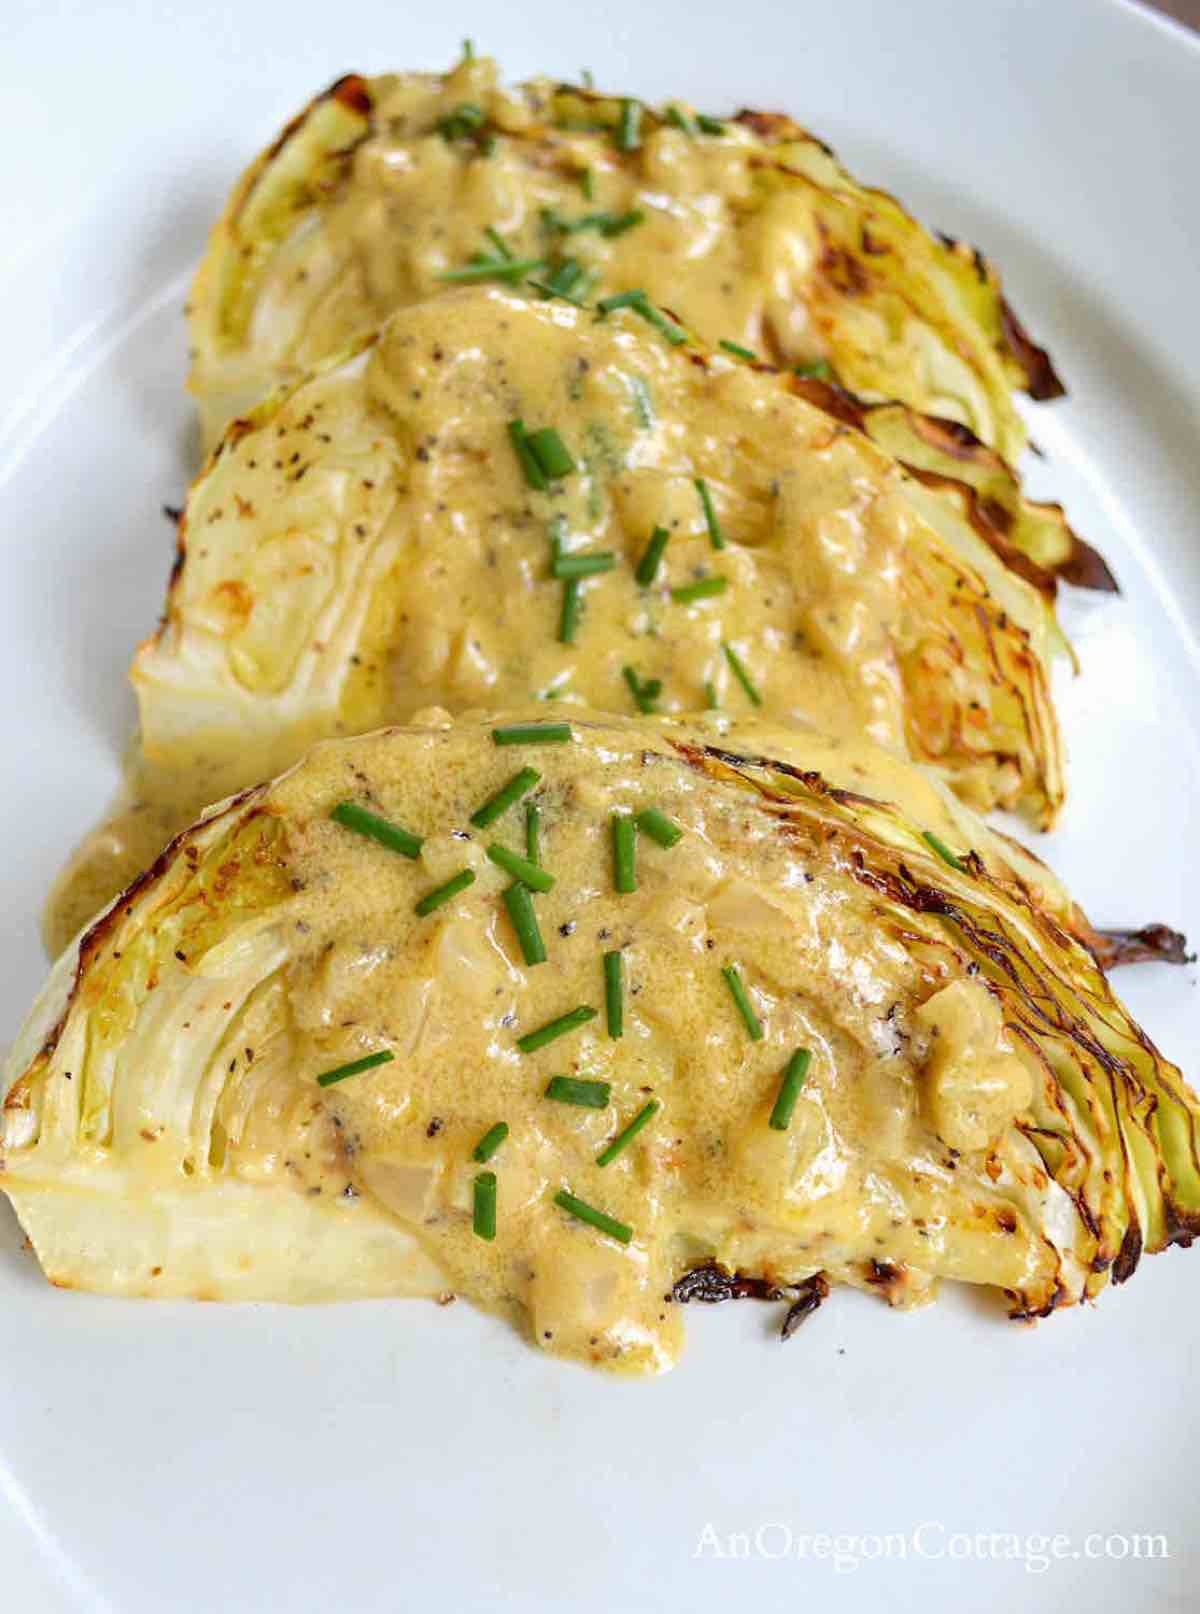 sliced cabbage with a sauce drizzled on top.